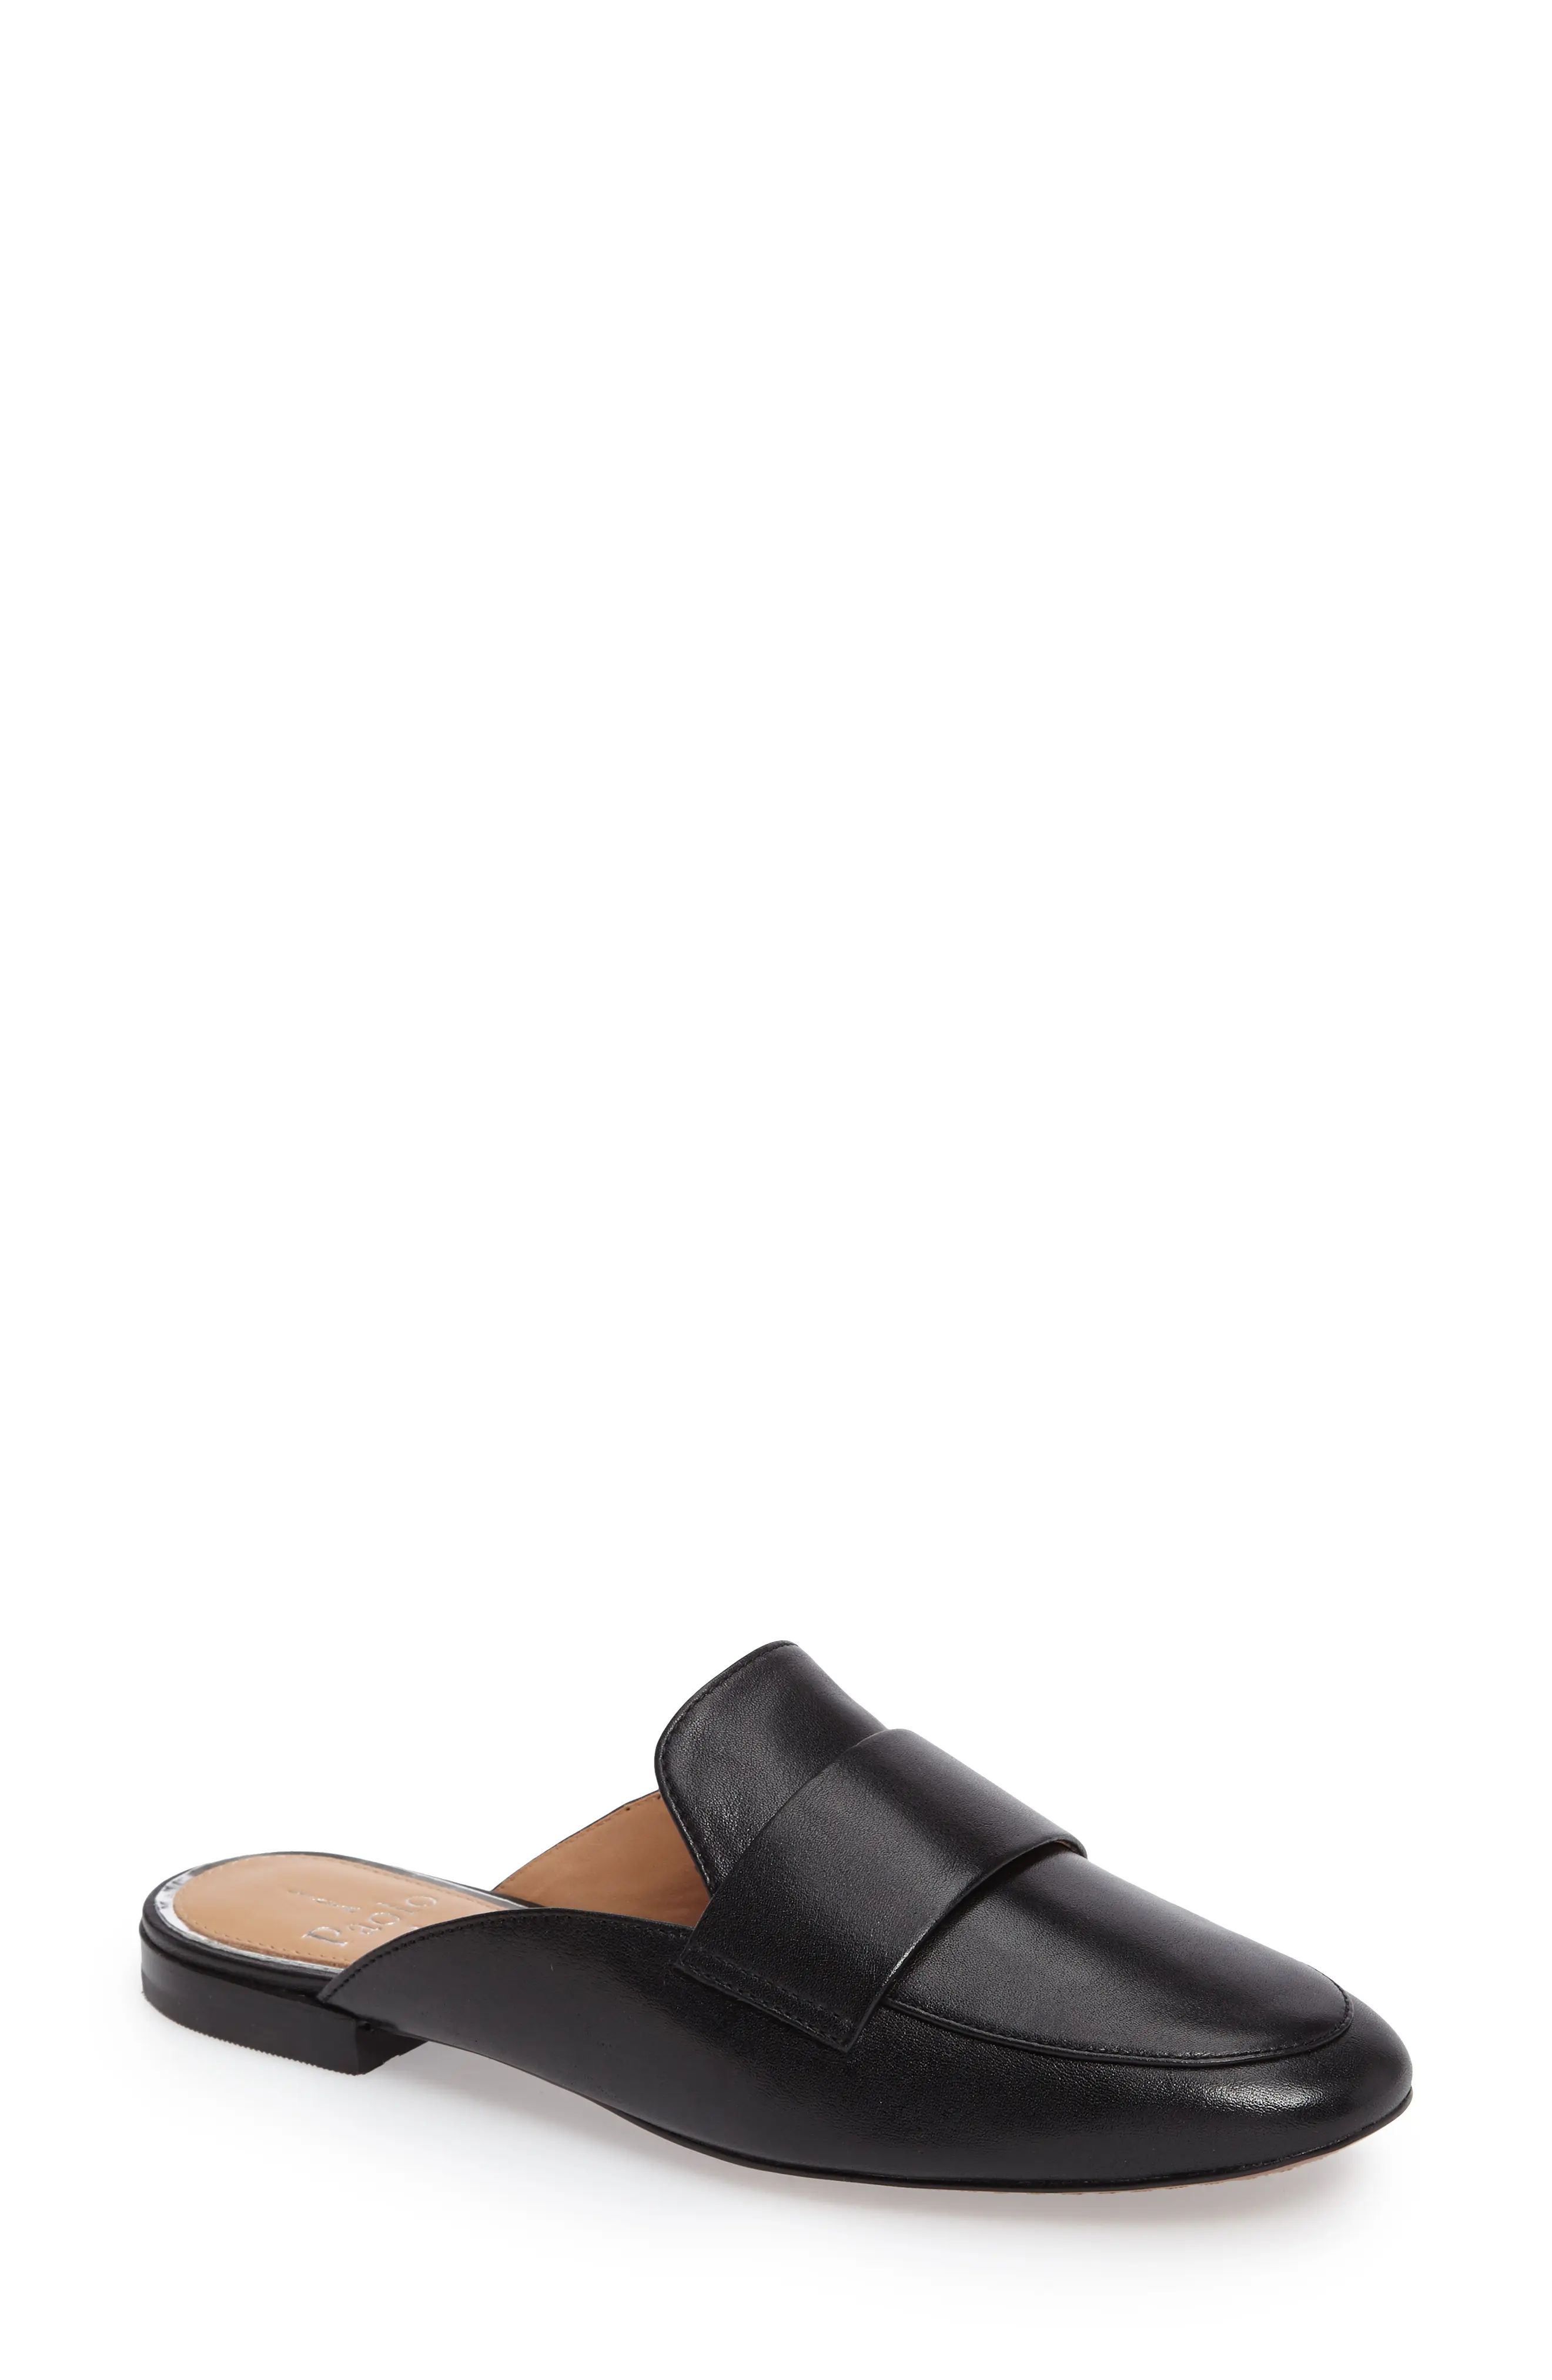 Women's Linea Paolo Annie Loafer Mule, Size 8 M - Black | Nordstrom